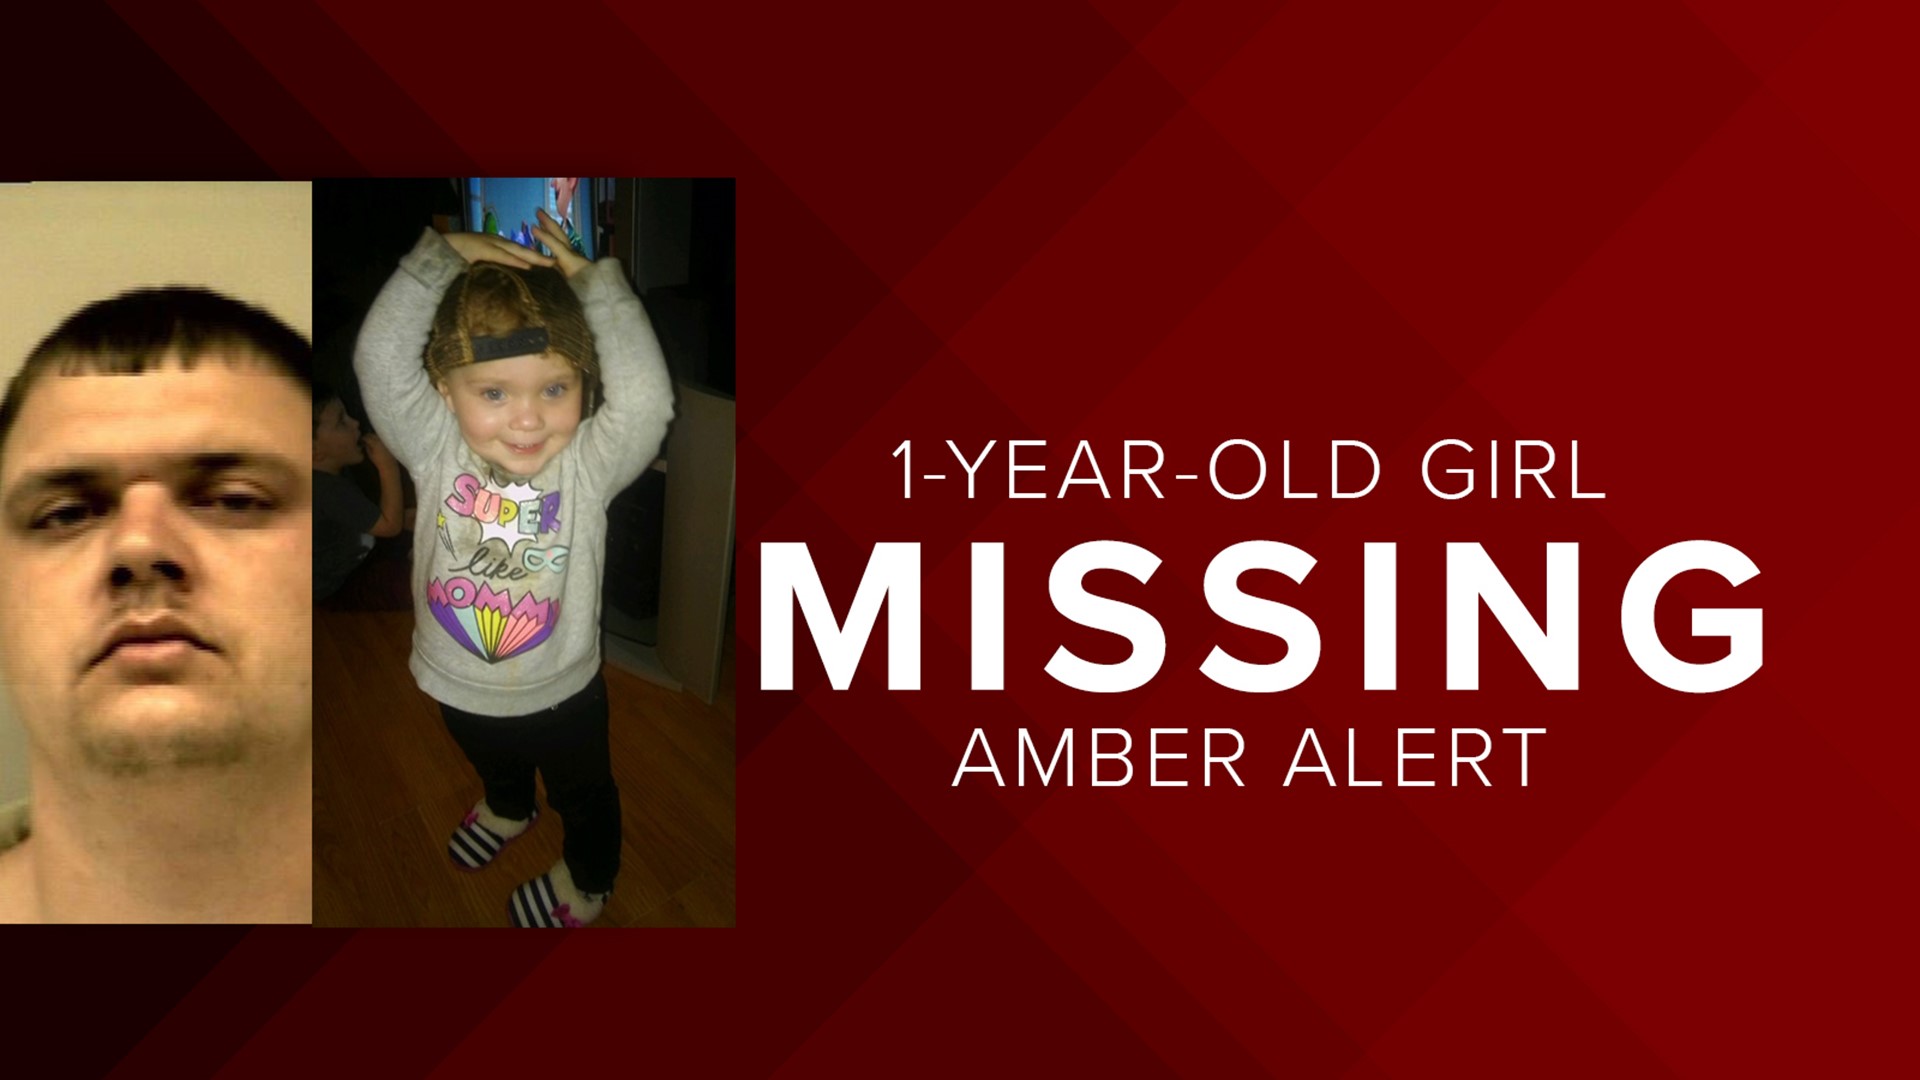 Levi's call issued for missing 1-year-old girl 